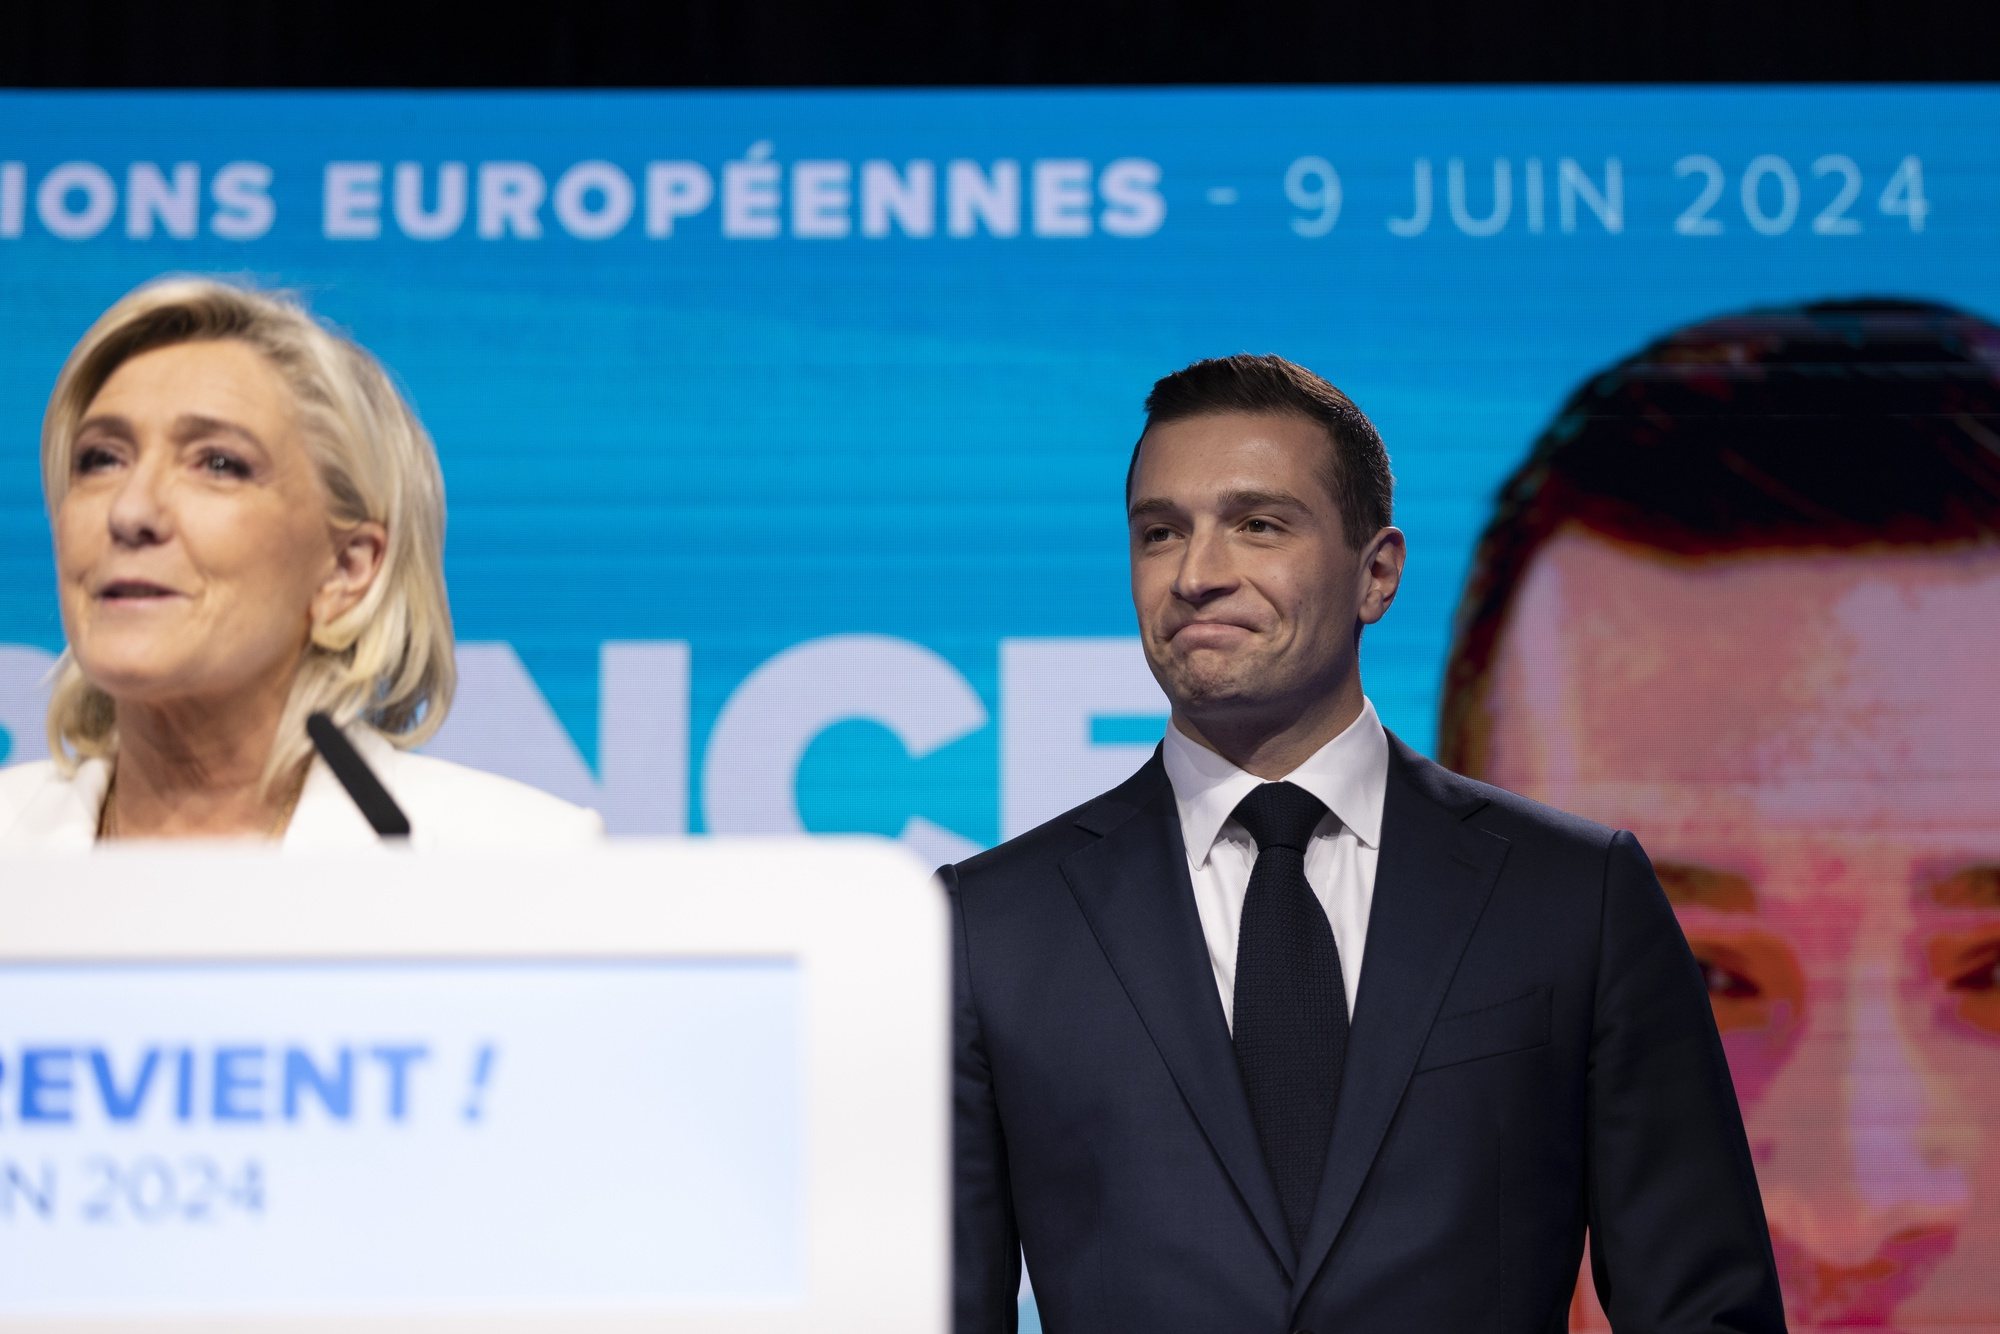 epa11400774 National Rally leader Jordan Bardella (R) reacts as parliamentary party leader Marine Le Pen (L) delivers a speech at the electoral party of the French right-wing party National Rally (Rassemblement National or RN) in Paris, France, 09 June 2024, after the first results of the European elections. The list of the Rassemblement National, led by party chief Jordan Bardella, is given winner in France according to first estimations after polls.  EPA/ANDRE PAIN